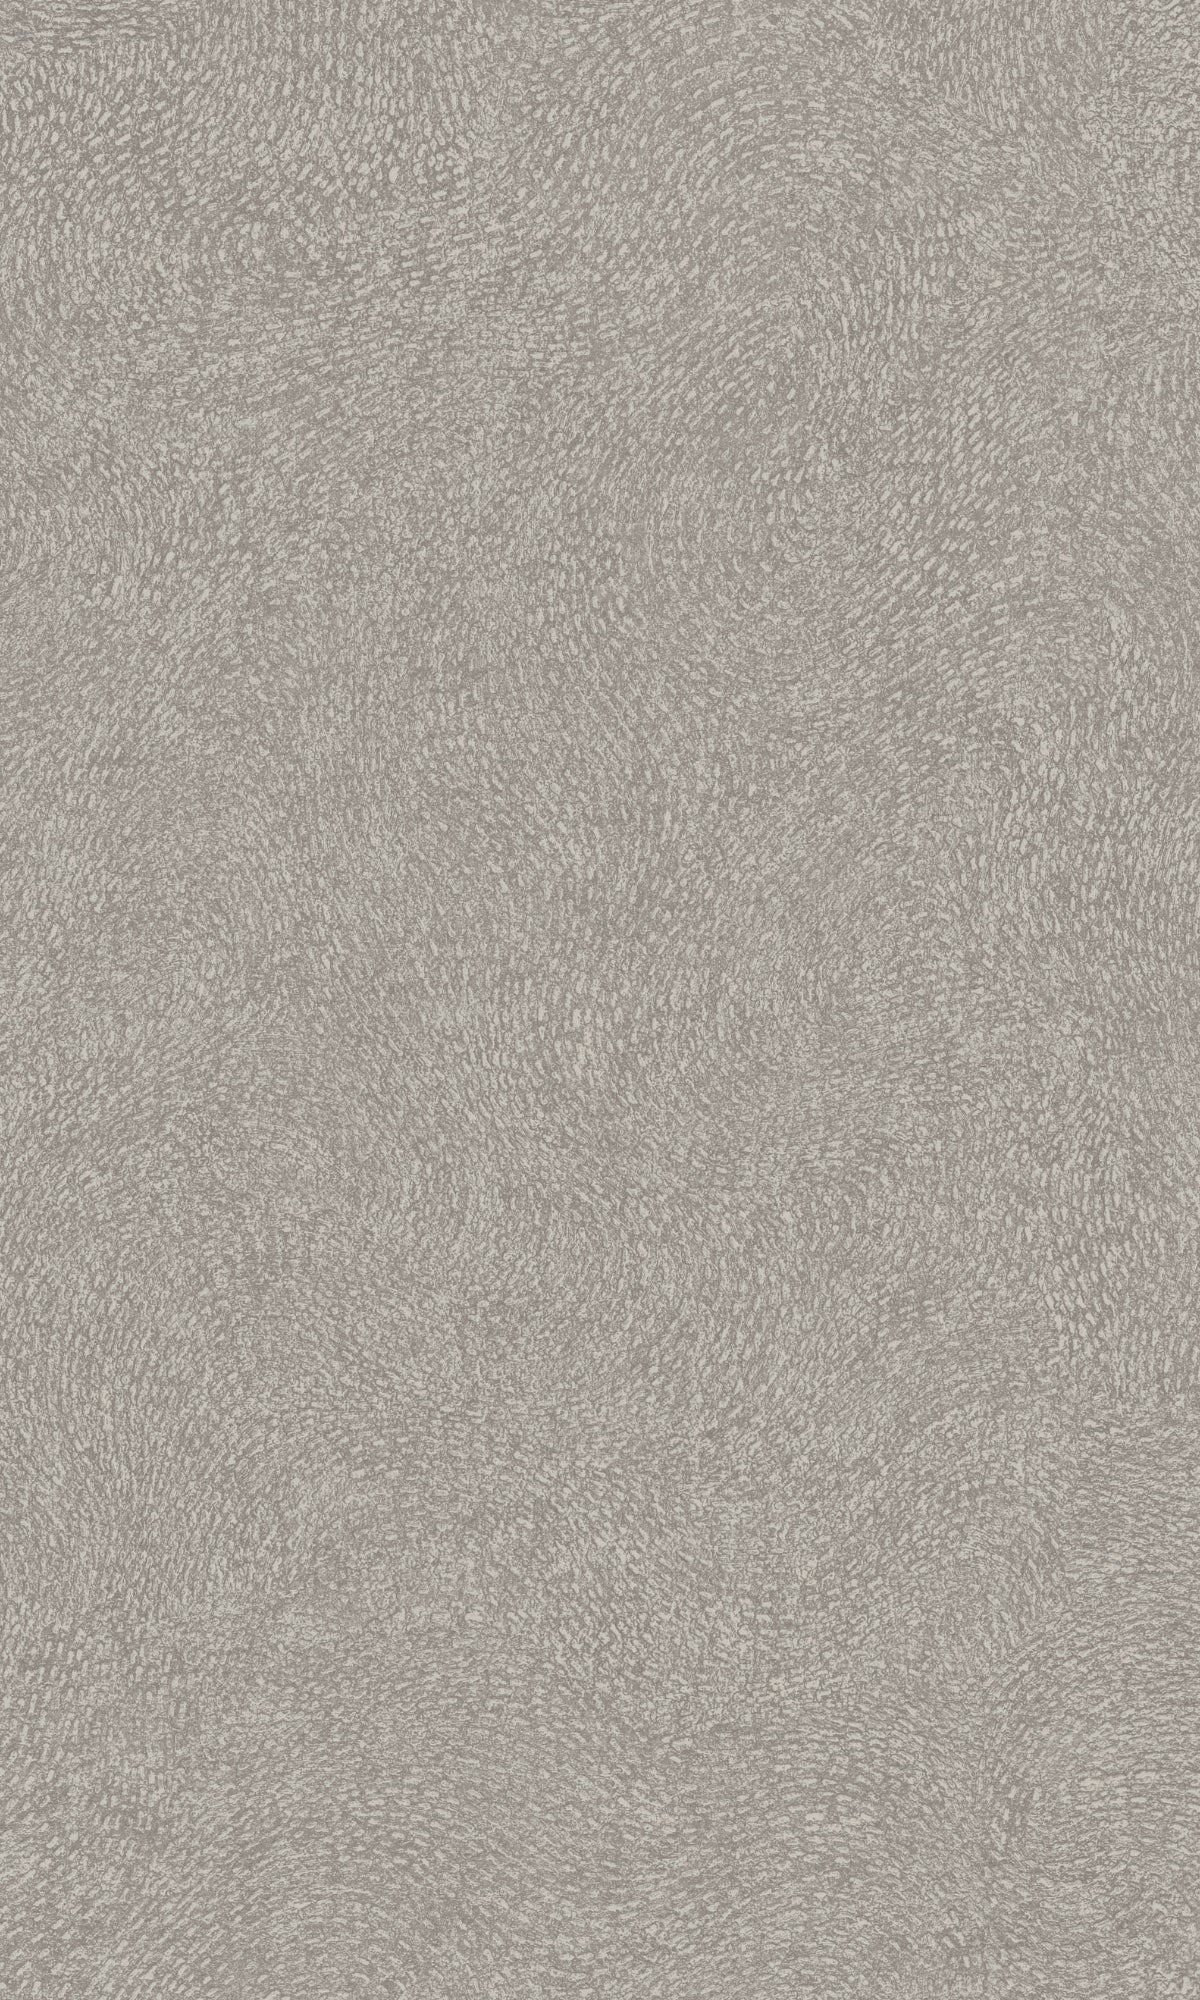 Taupe Abstract Textured Plain Wallpaper R9366